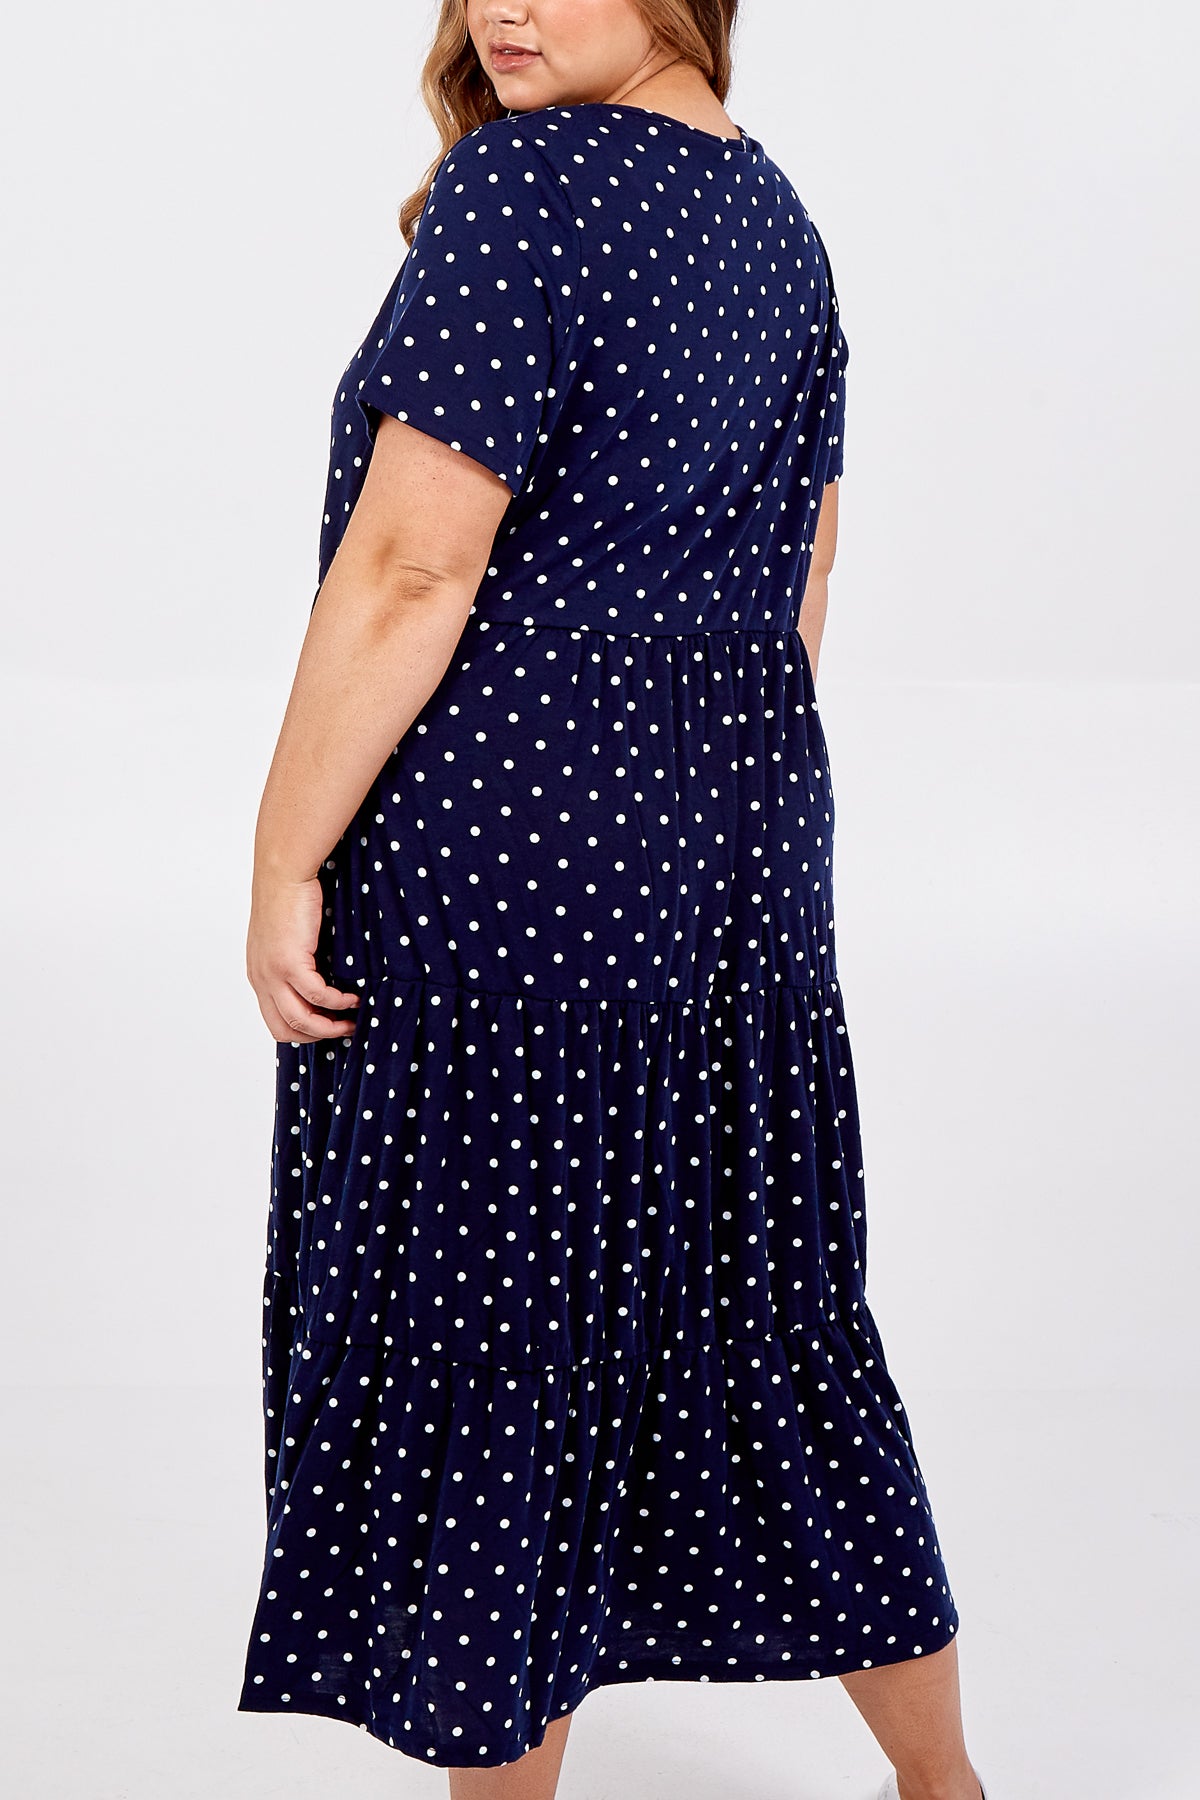 Pauseology Curve Short sleeved Tiered Polka Dot Smock Dress menopause plus size tiered summer made in italy